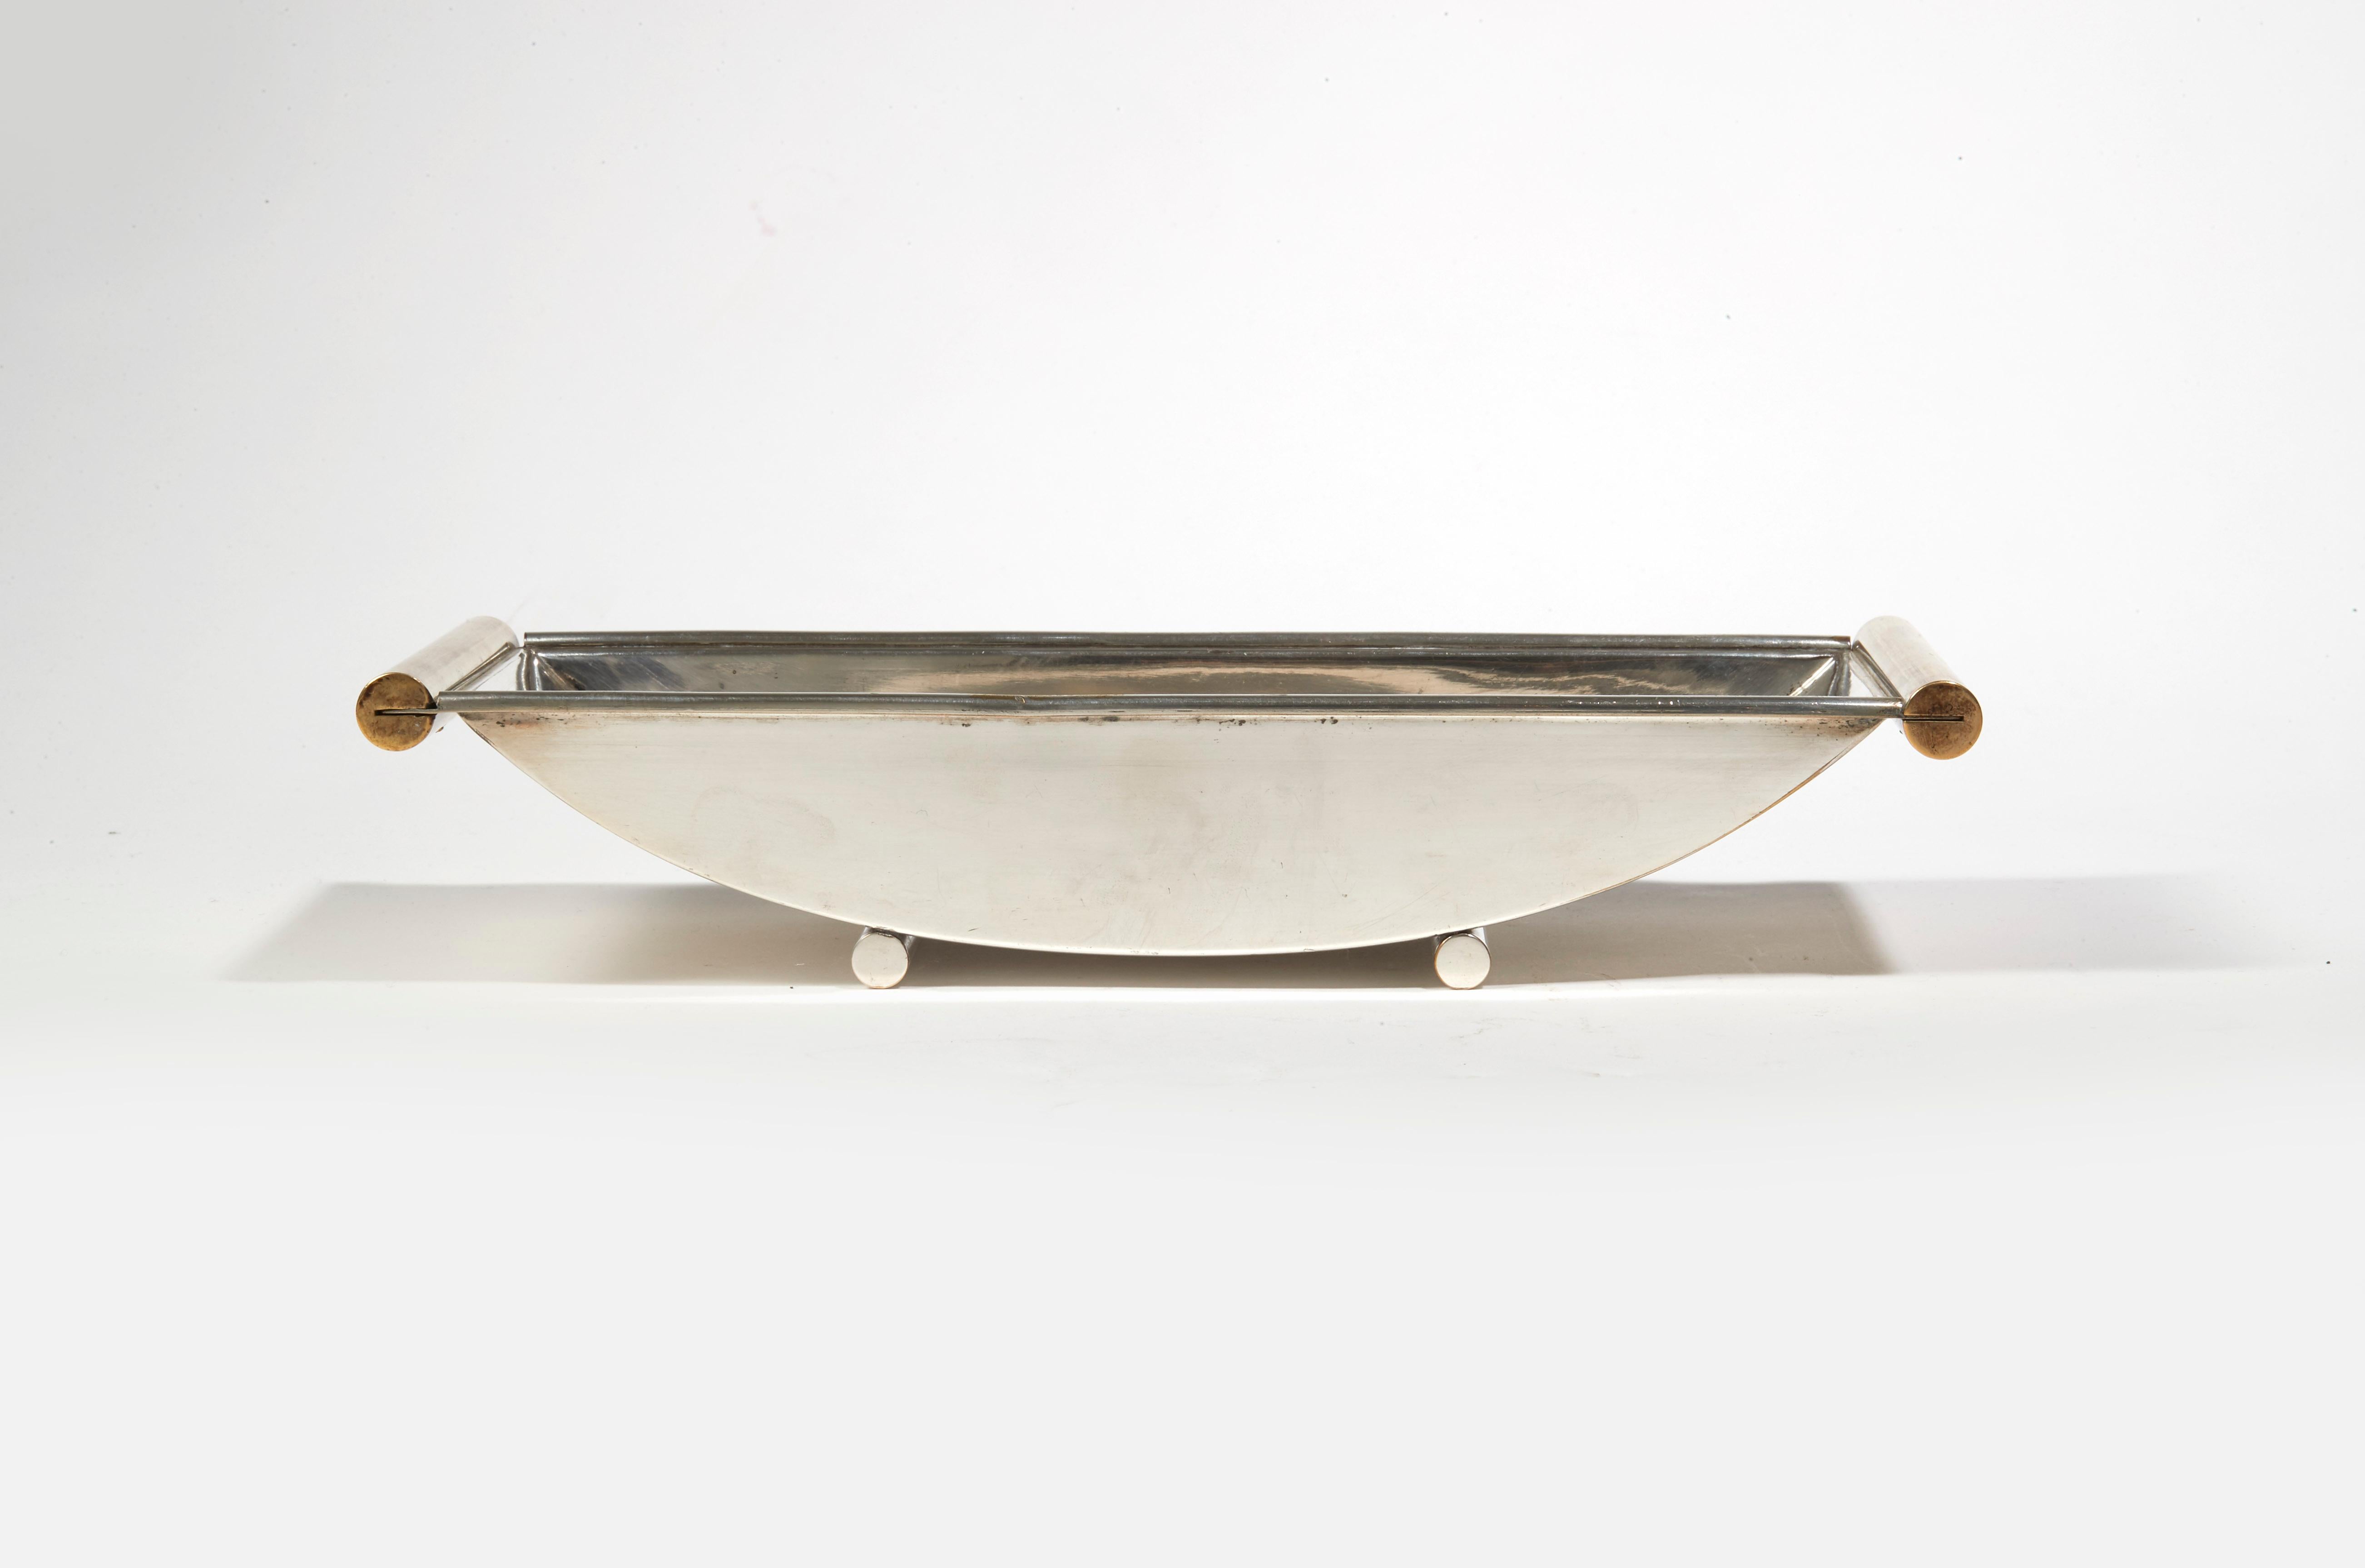 Bowl in silver nickel-plated metal, with two tubular bars as legs and wooden tubular handles. Underside stamped with 